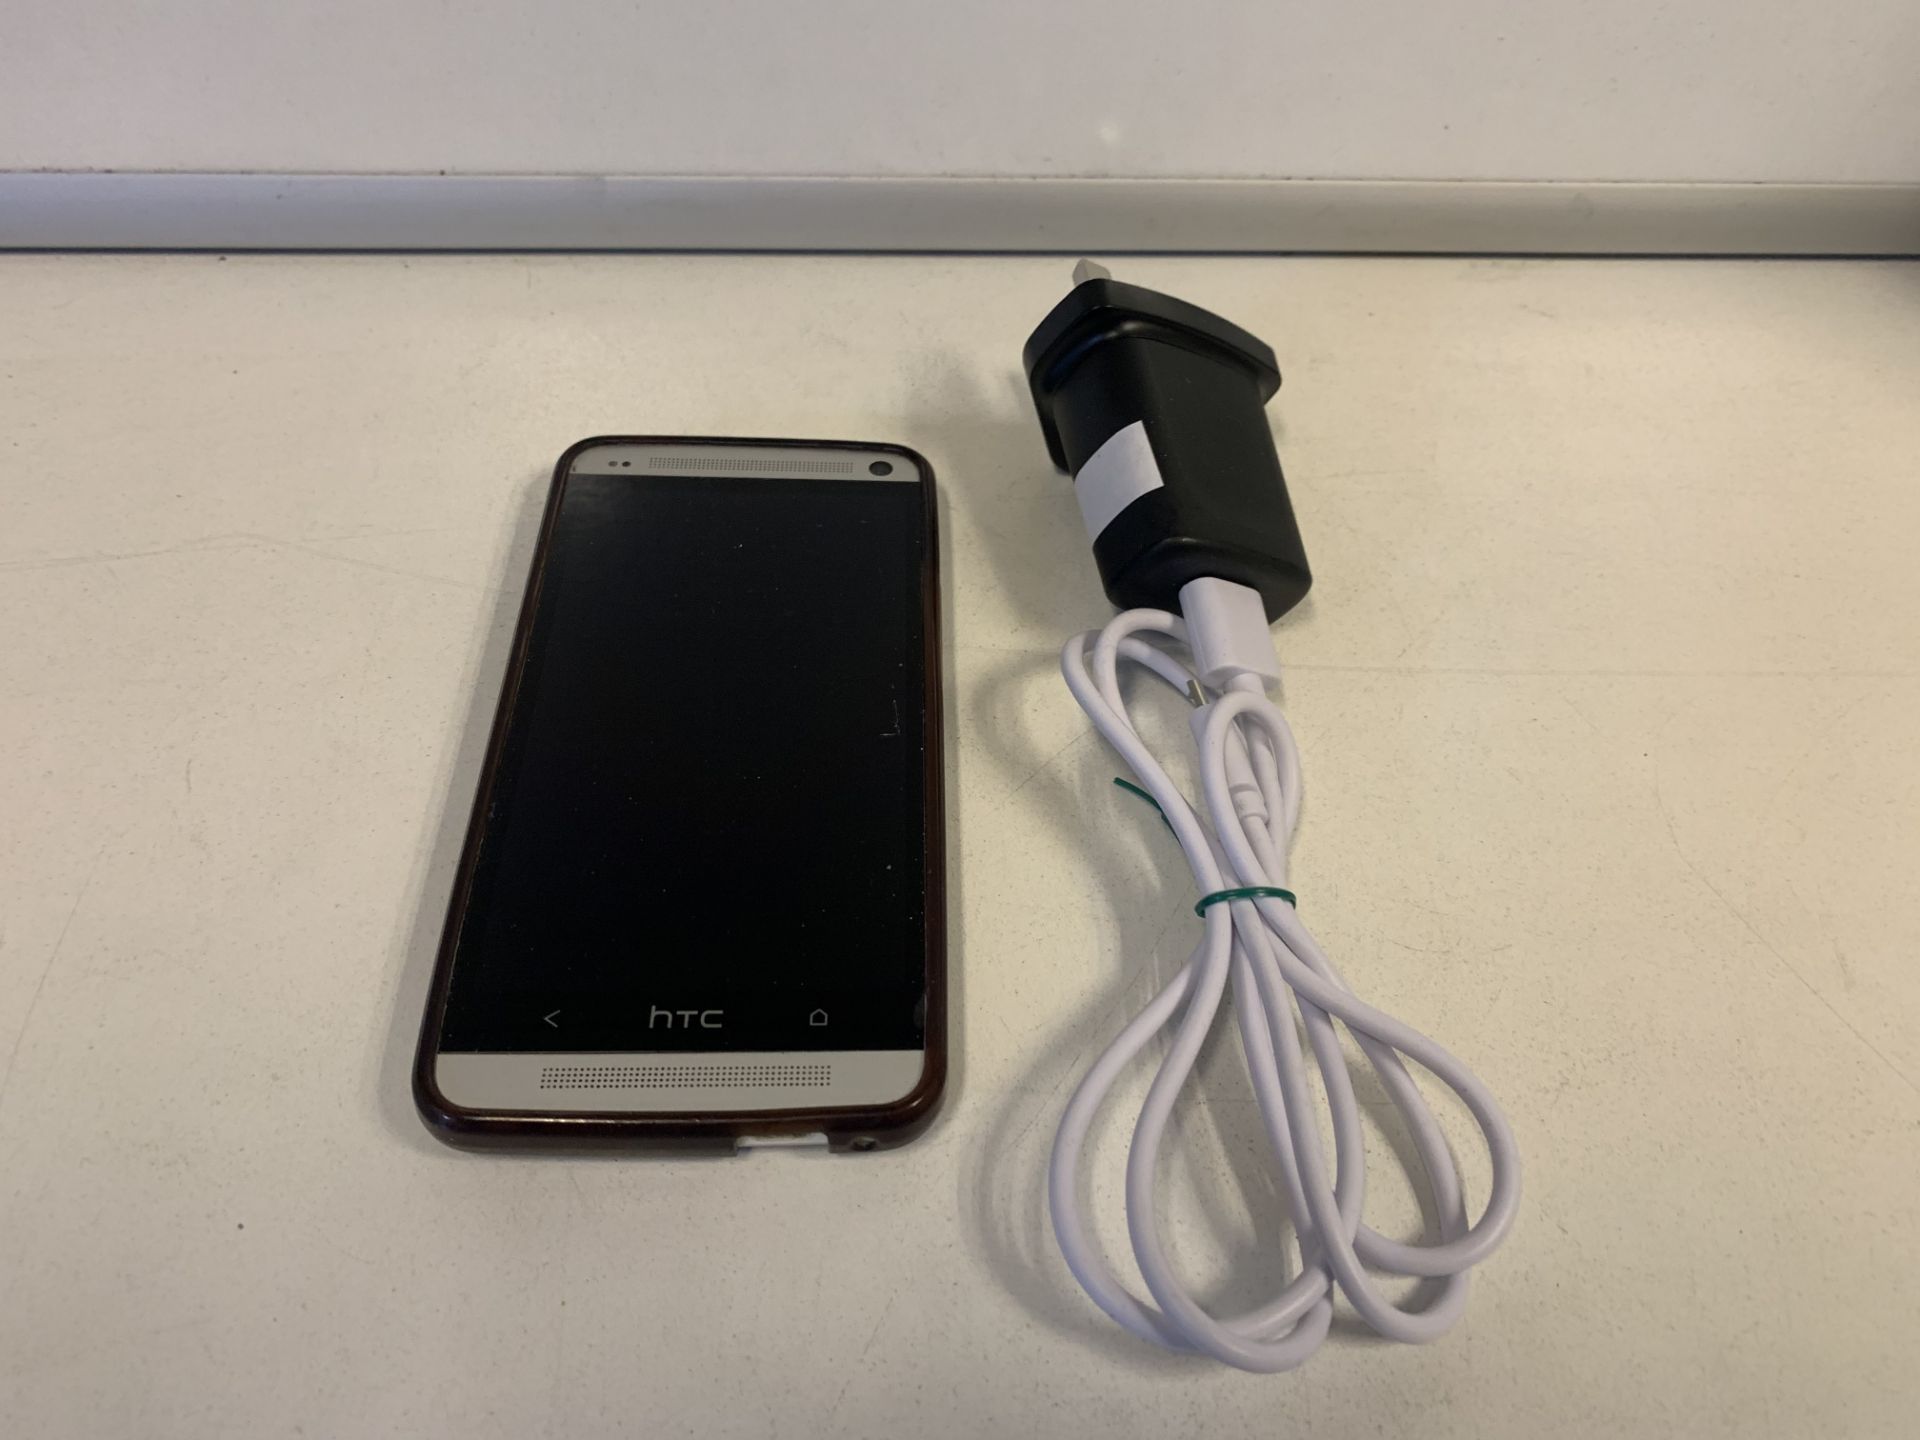 HTC ONE SMARTPHONE 32GB STORAGE BEATS AUDIO WITH CHARGER (17/20)